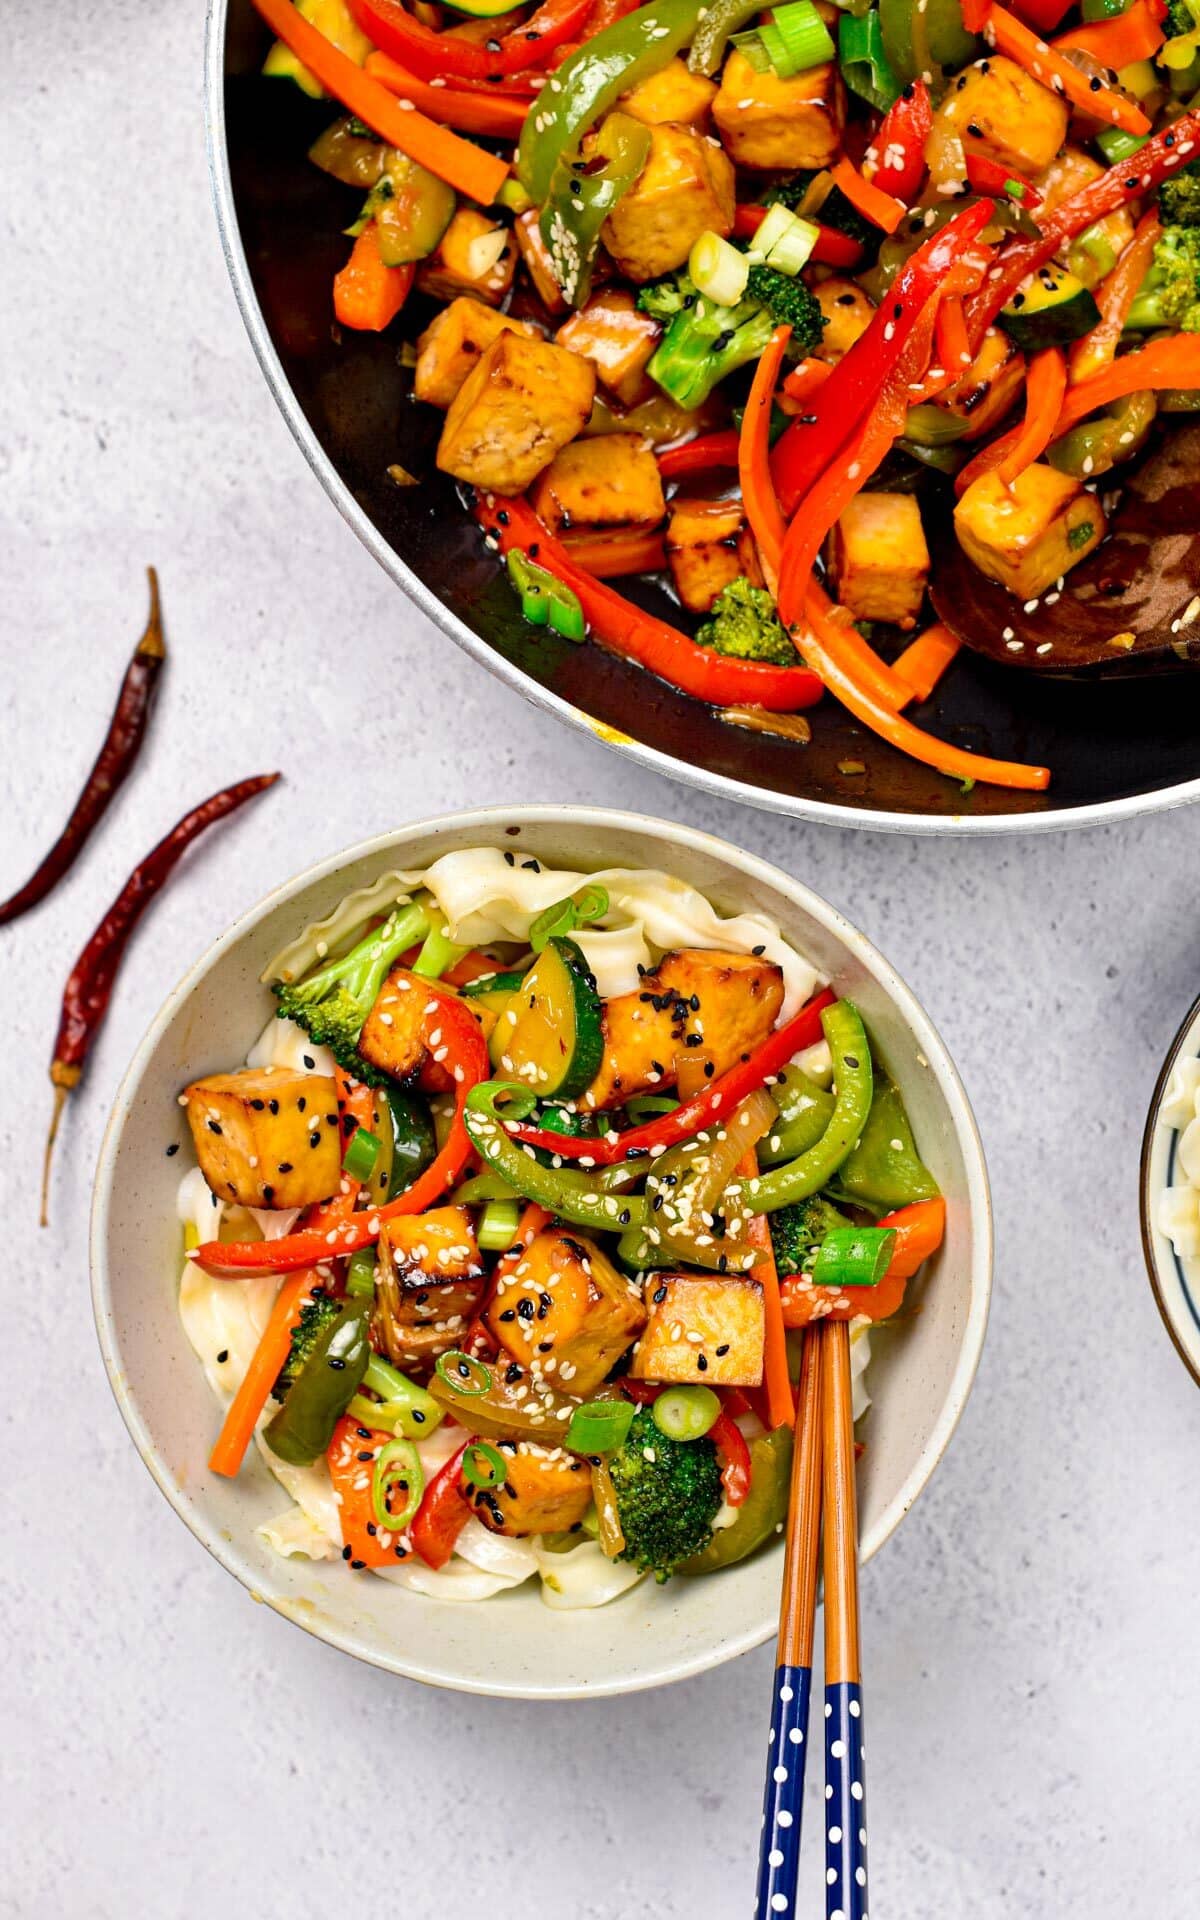 This Vegan Stir Fry is an healthy quick and easy dinner packed with more than 8 plants. Plus, it's a very fulfilling diner too packed with plant-based proteins from tofu. 